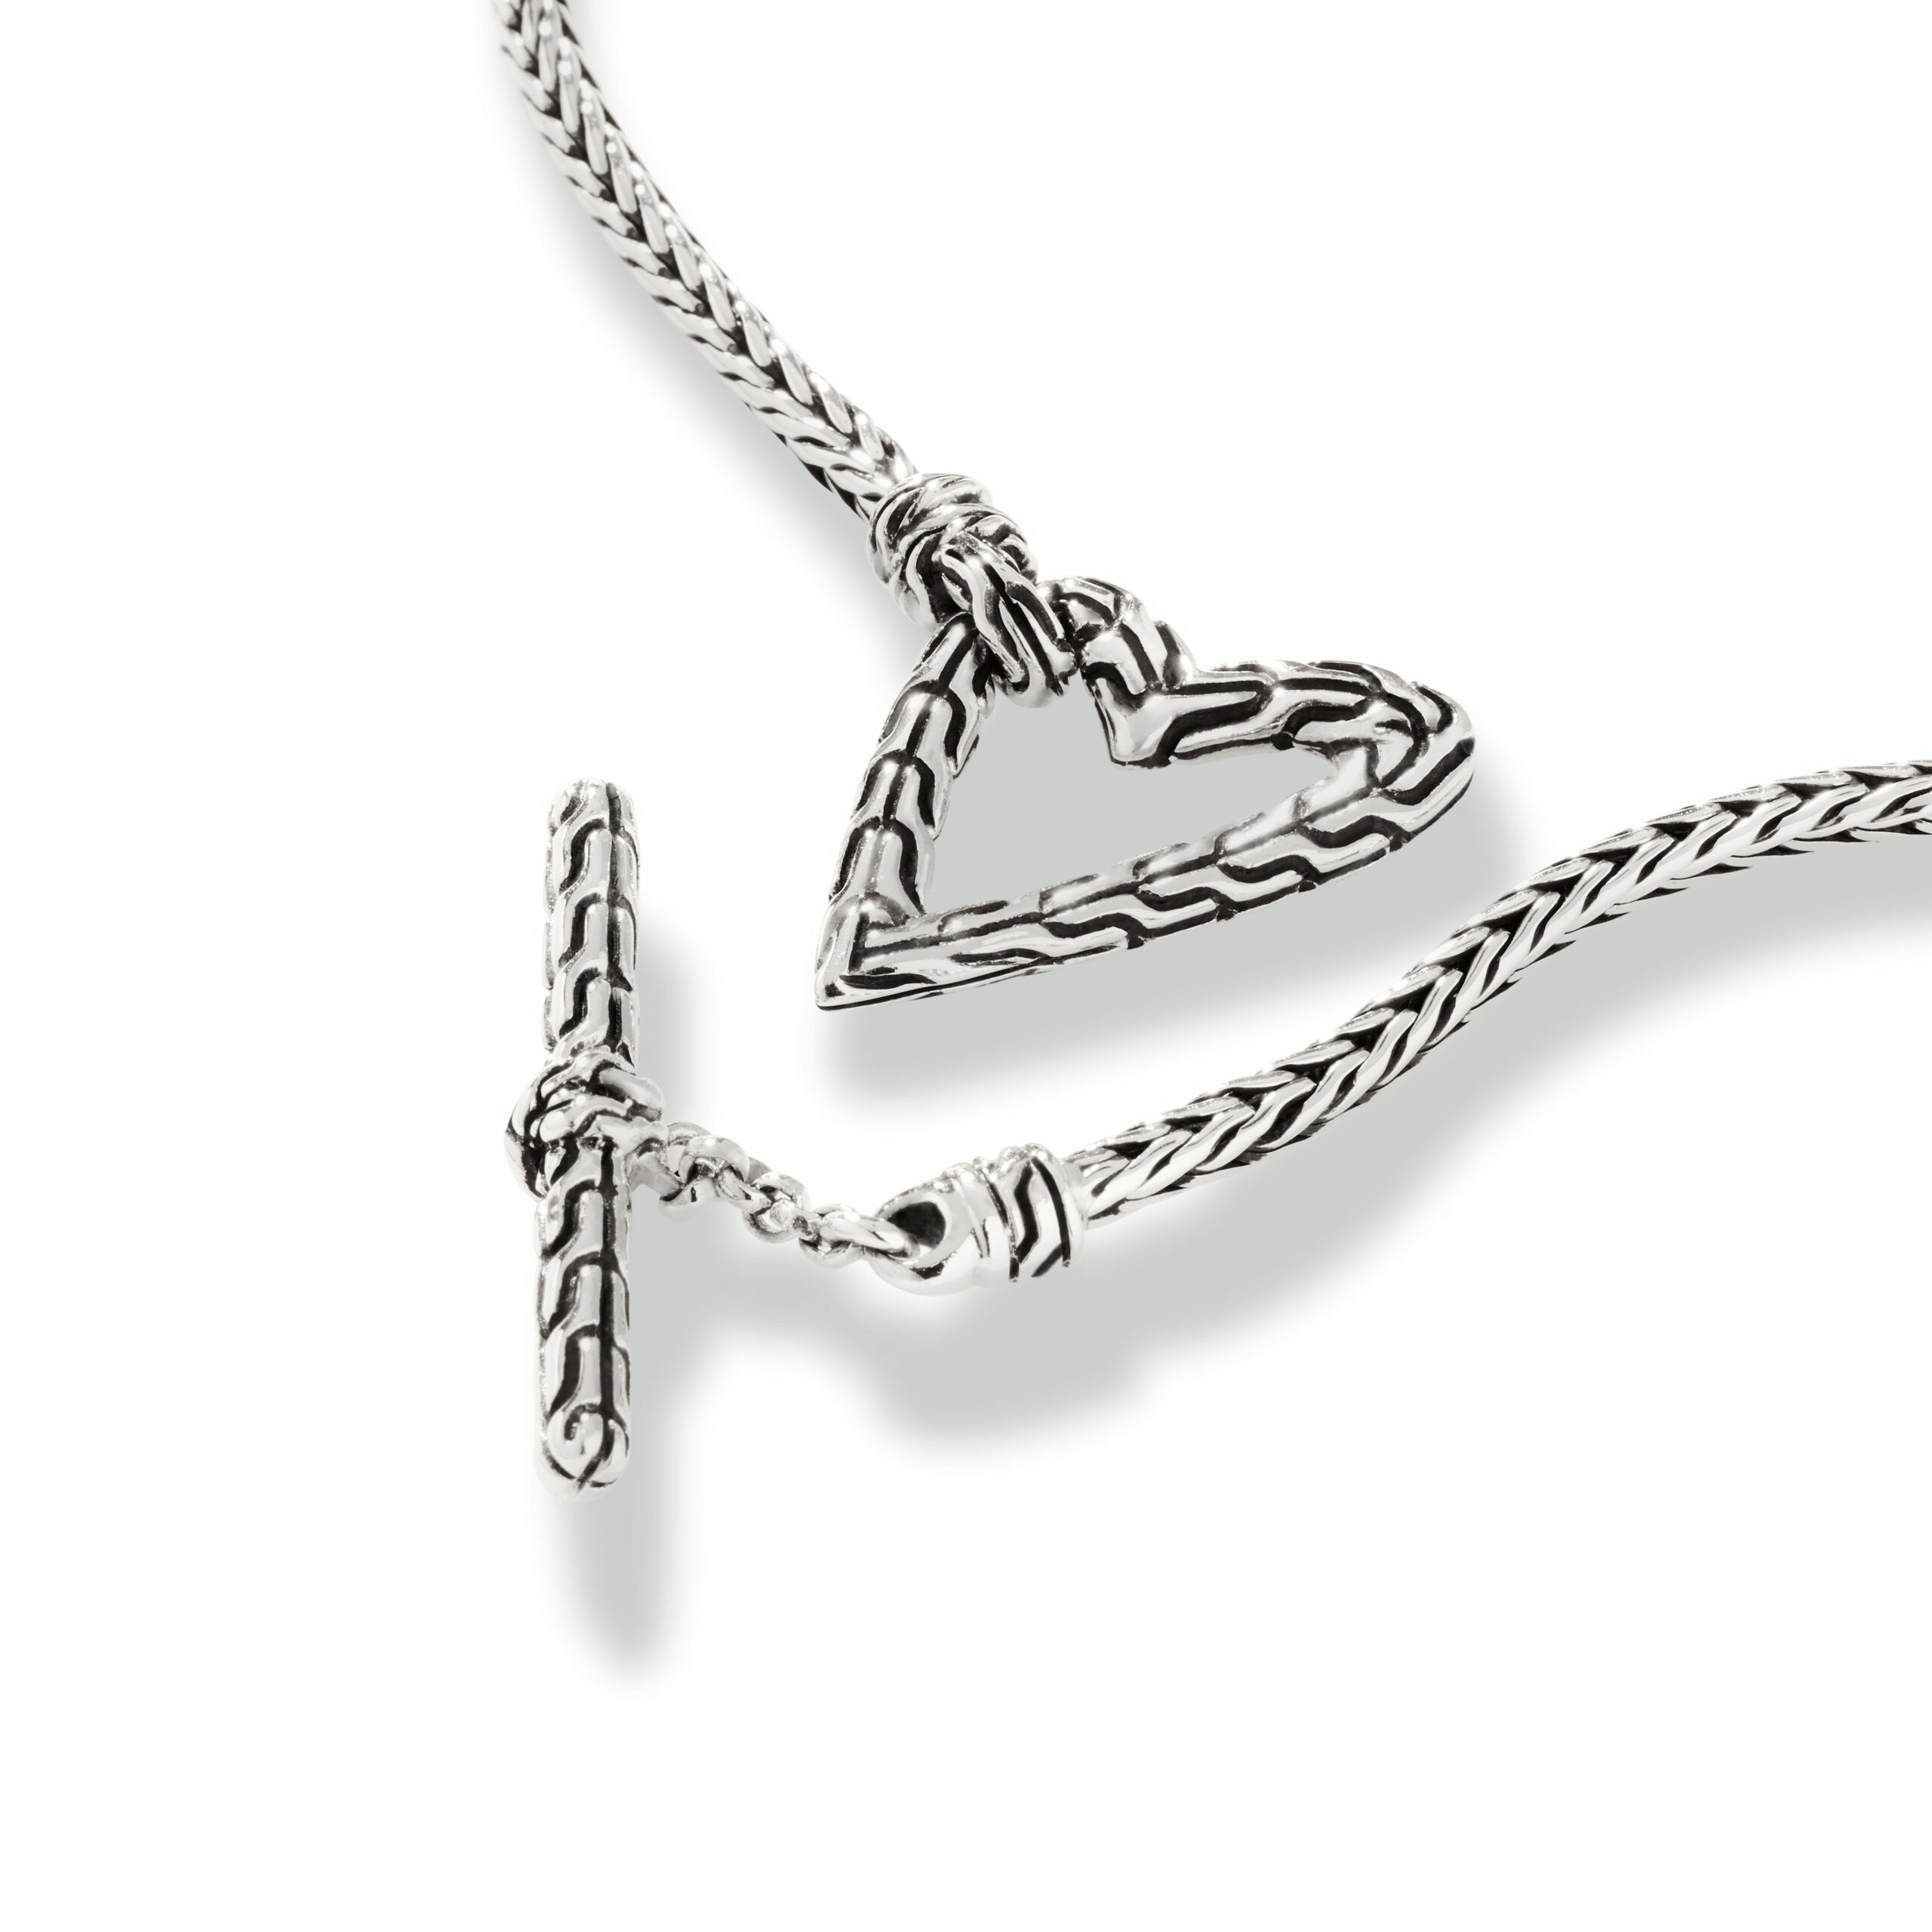 This bracelet by John Hardy is crafted from sterling silver and features a heart and toggle clasp.